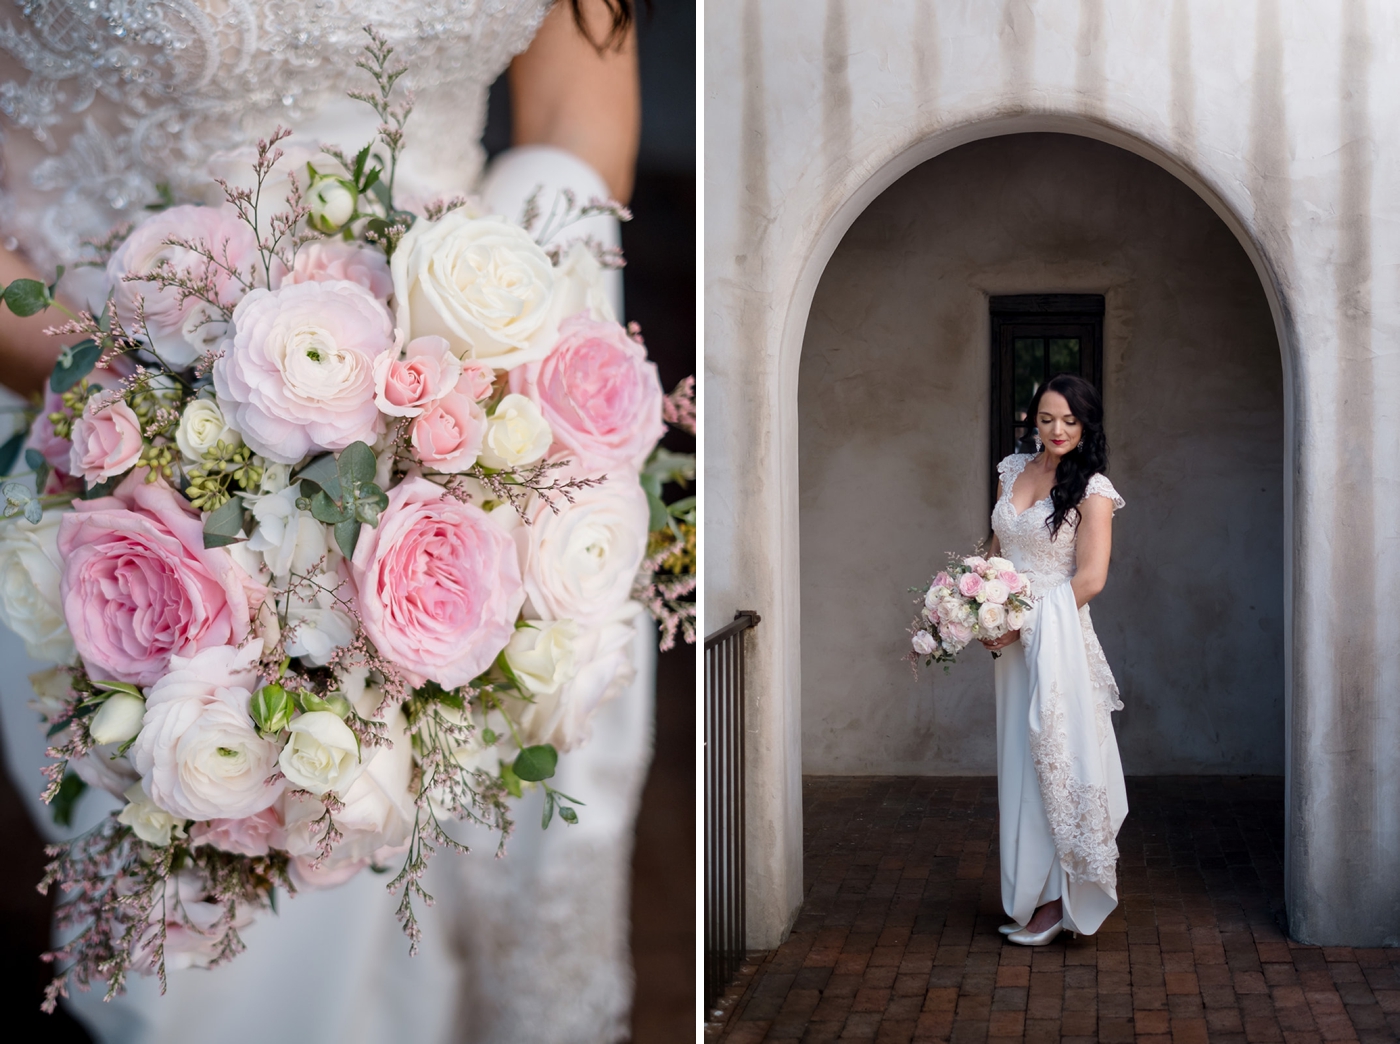 Bridal bouquet with blush roses, ranunculus, and hydrangeas